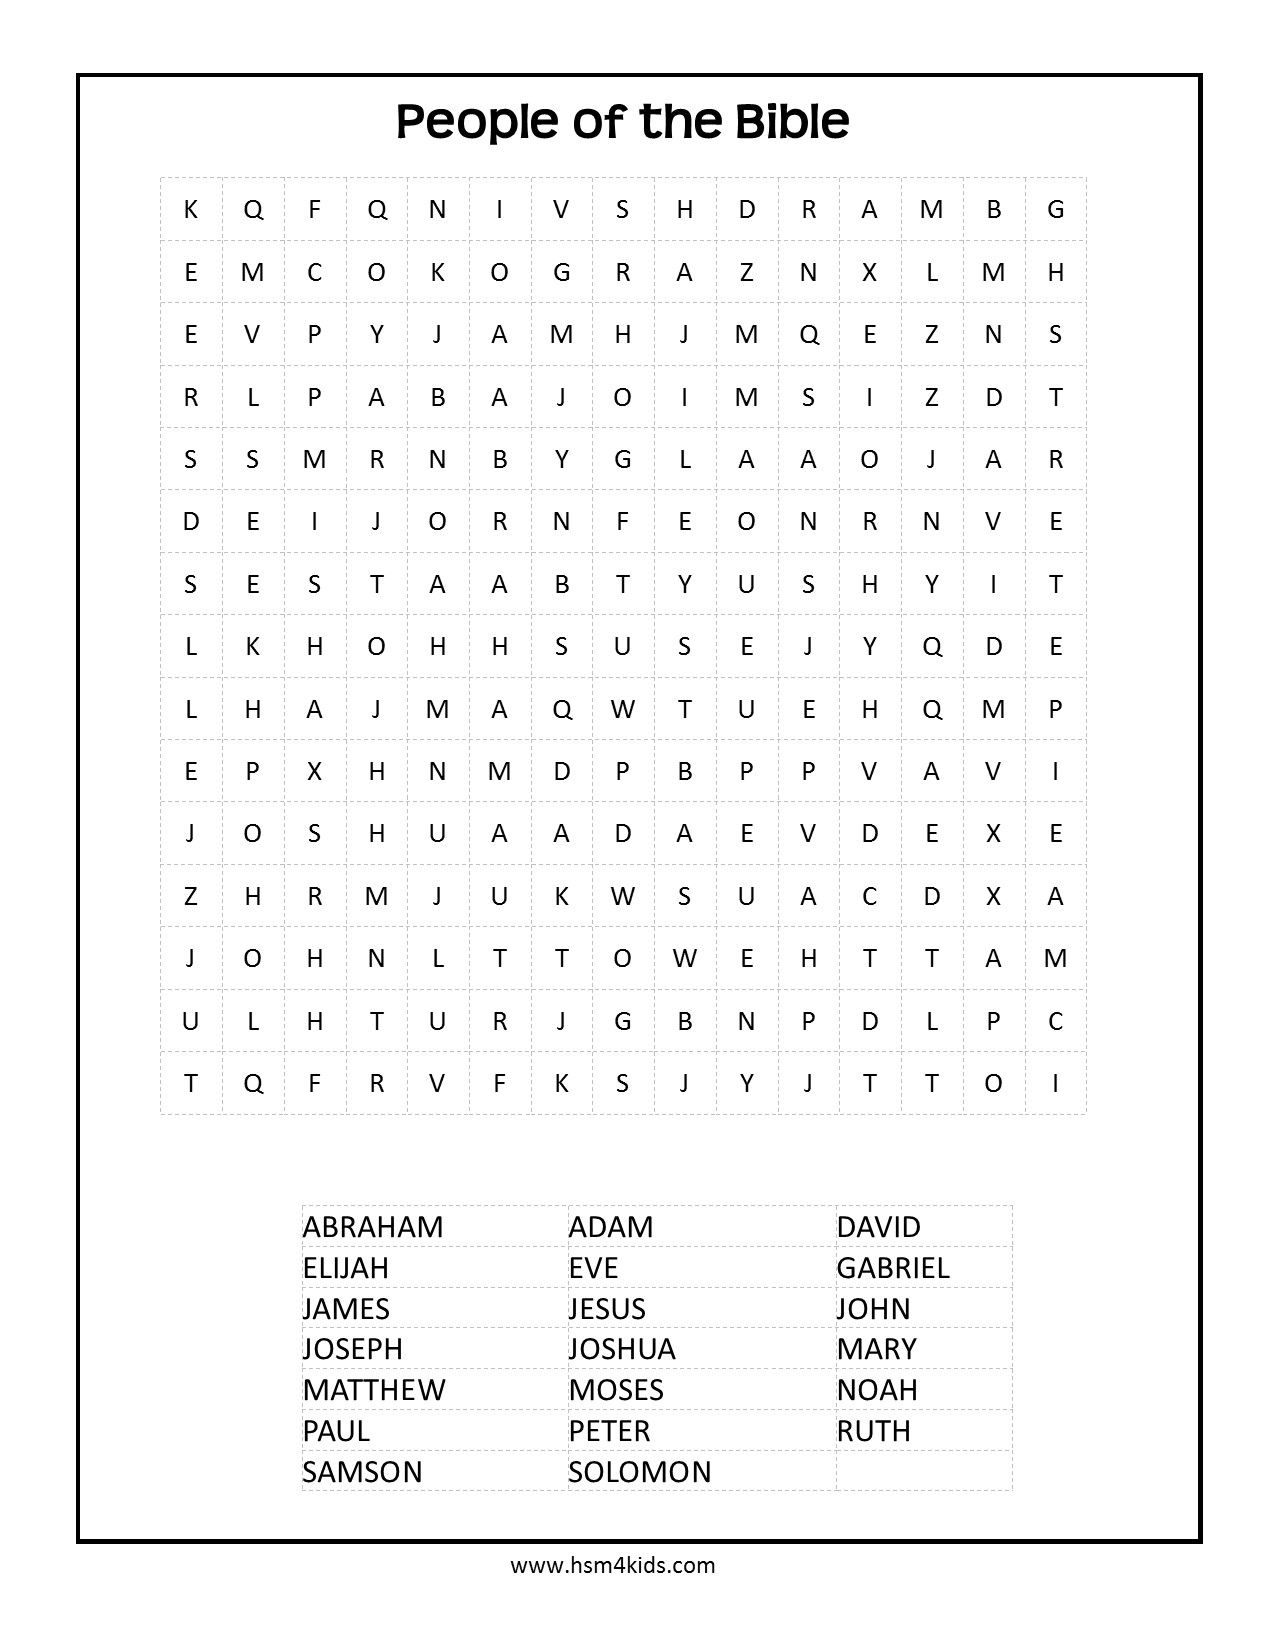 Psalm 107 Song Of Thanksgiving Bible Word Search Puzzles: If | Word - Thanksgiving Bible Word Search Printable